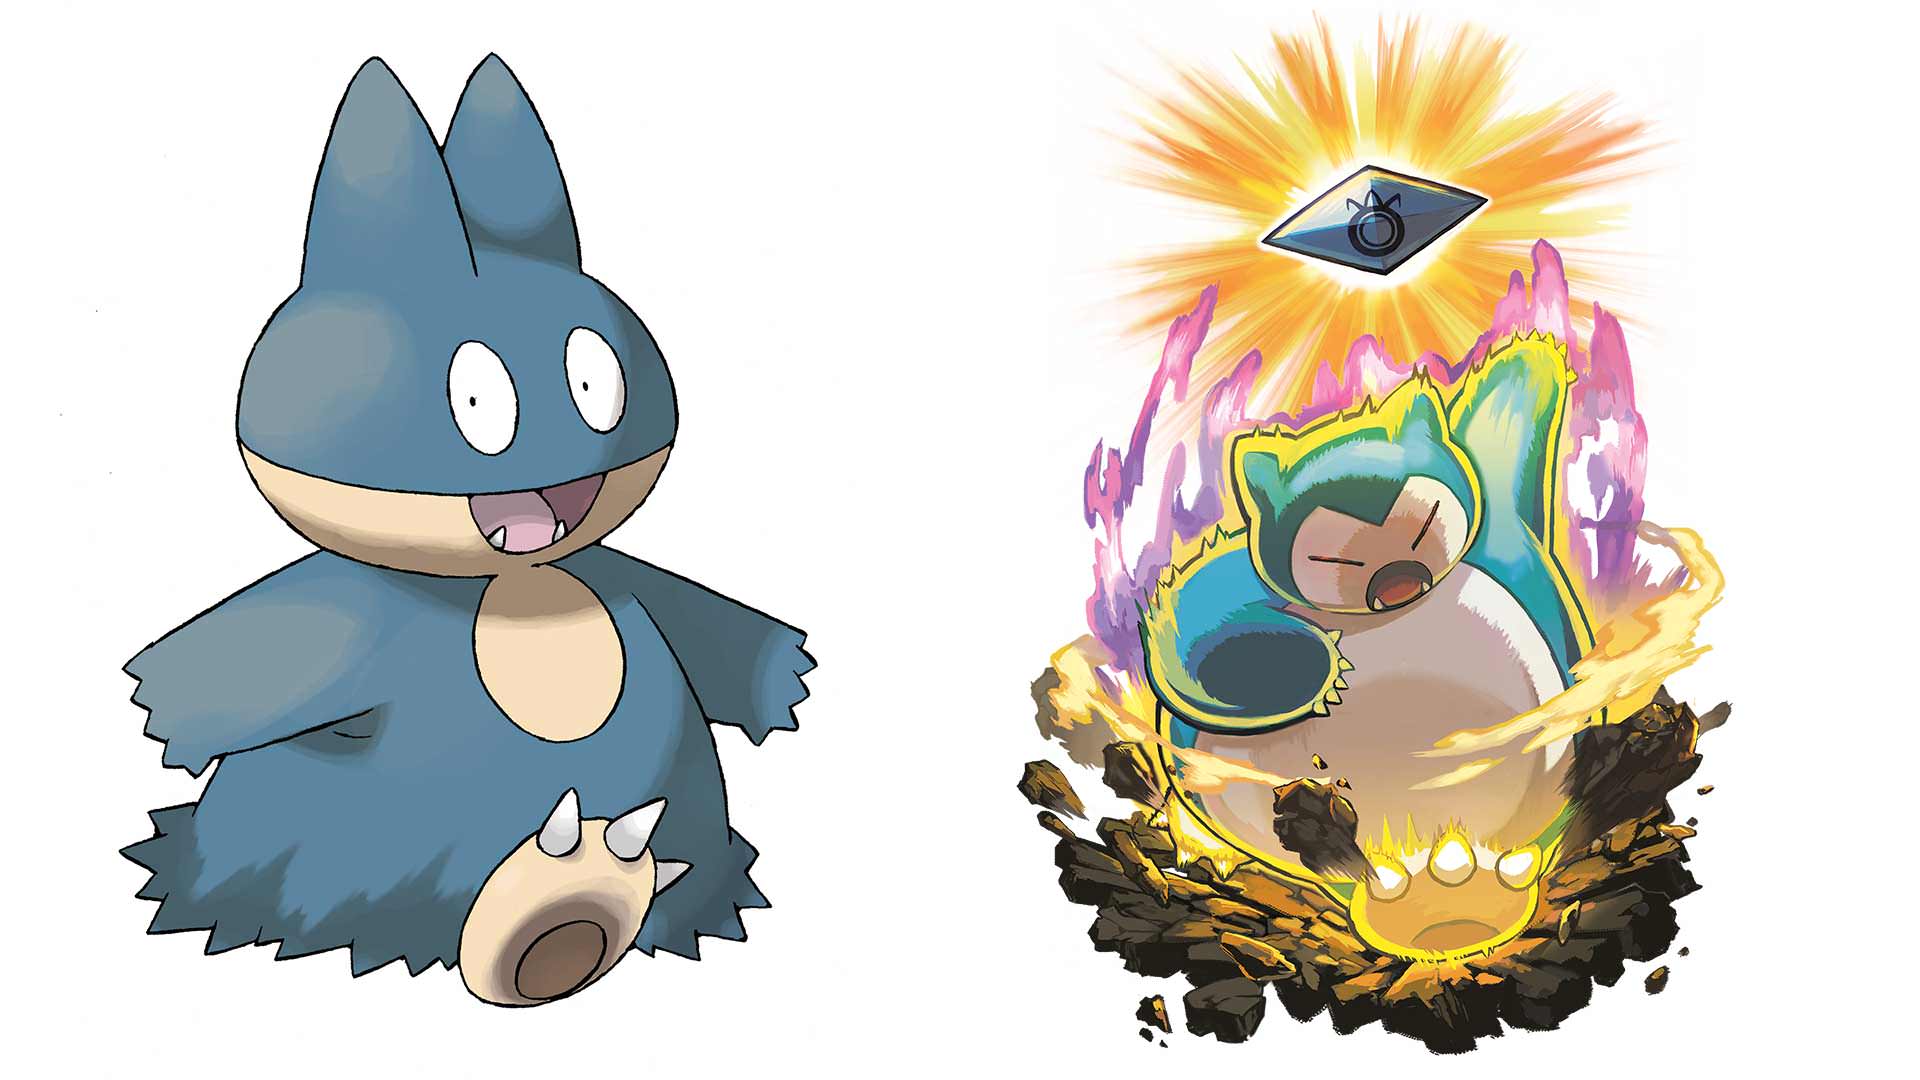 Buy Pokemon Sun & Moon Early And Get Munchlax Evolving Snorlax